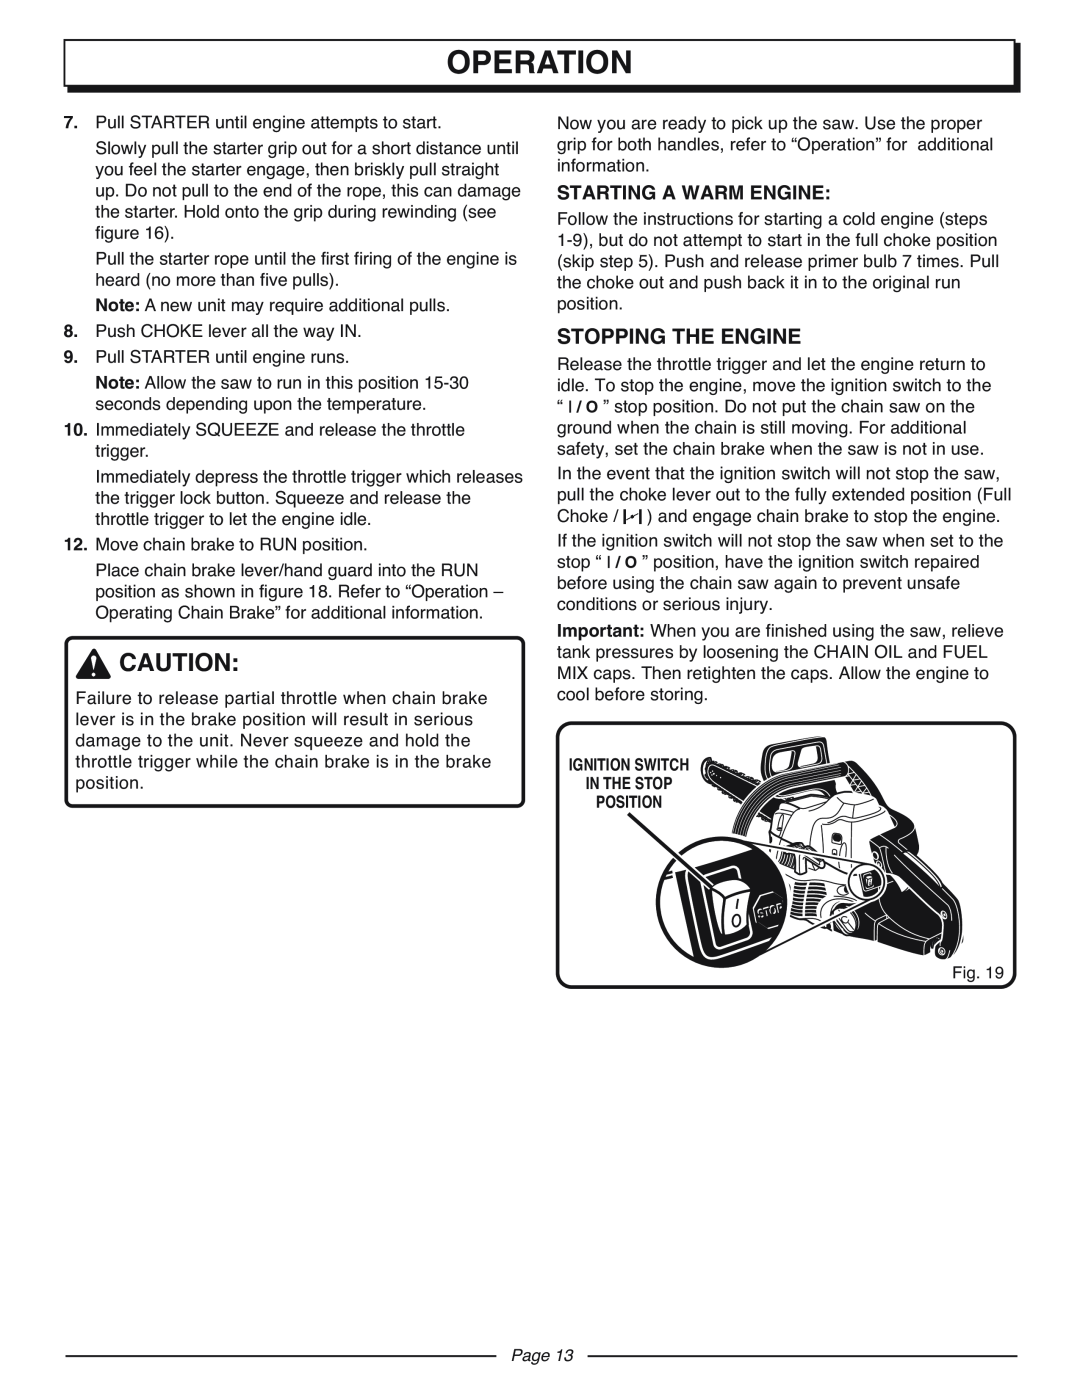 Homelite UT10927A manual Stopping The Engine, Starting A Warm Engine, Ignition Switch In The Stop Position, Operation, Page 